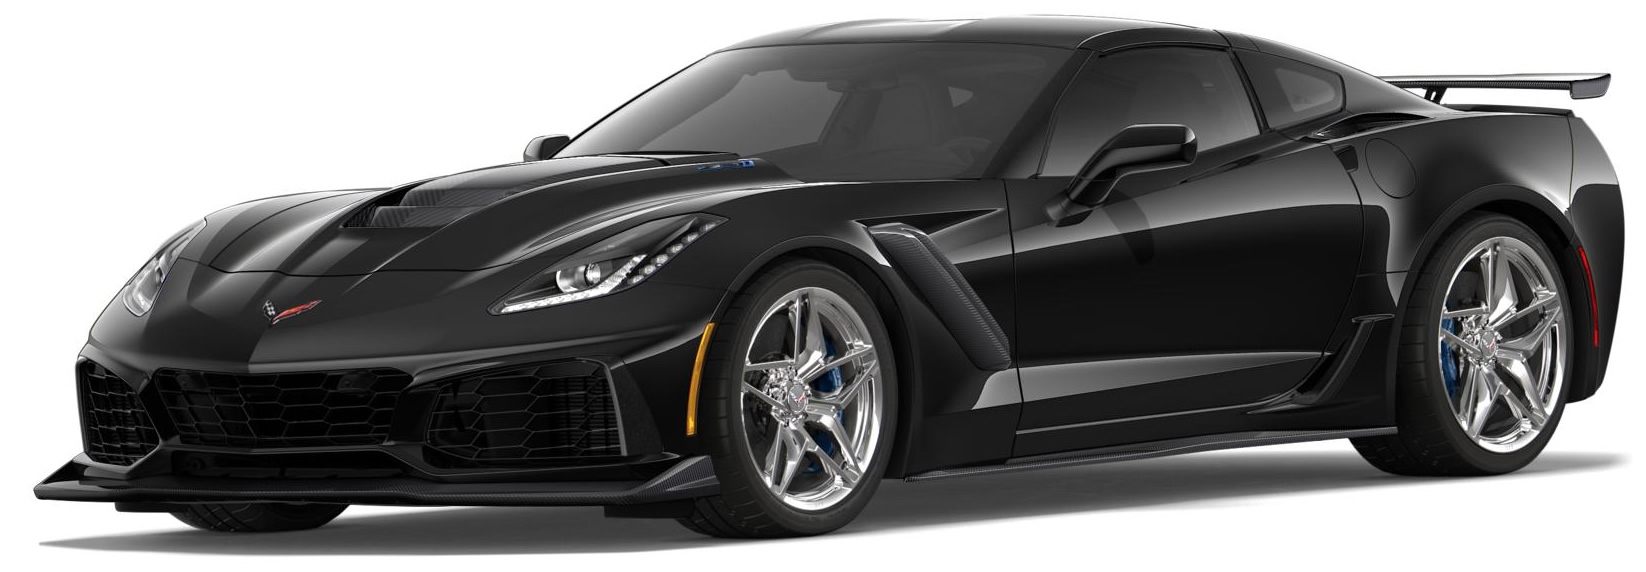 2019 Corvette ZR1 Coupe in Black with Chrome Wheels